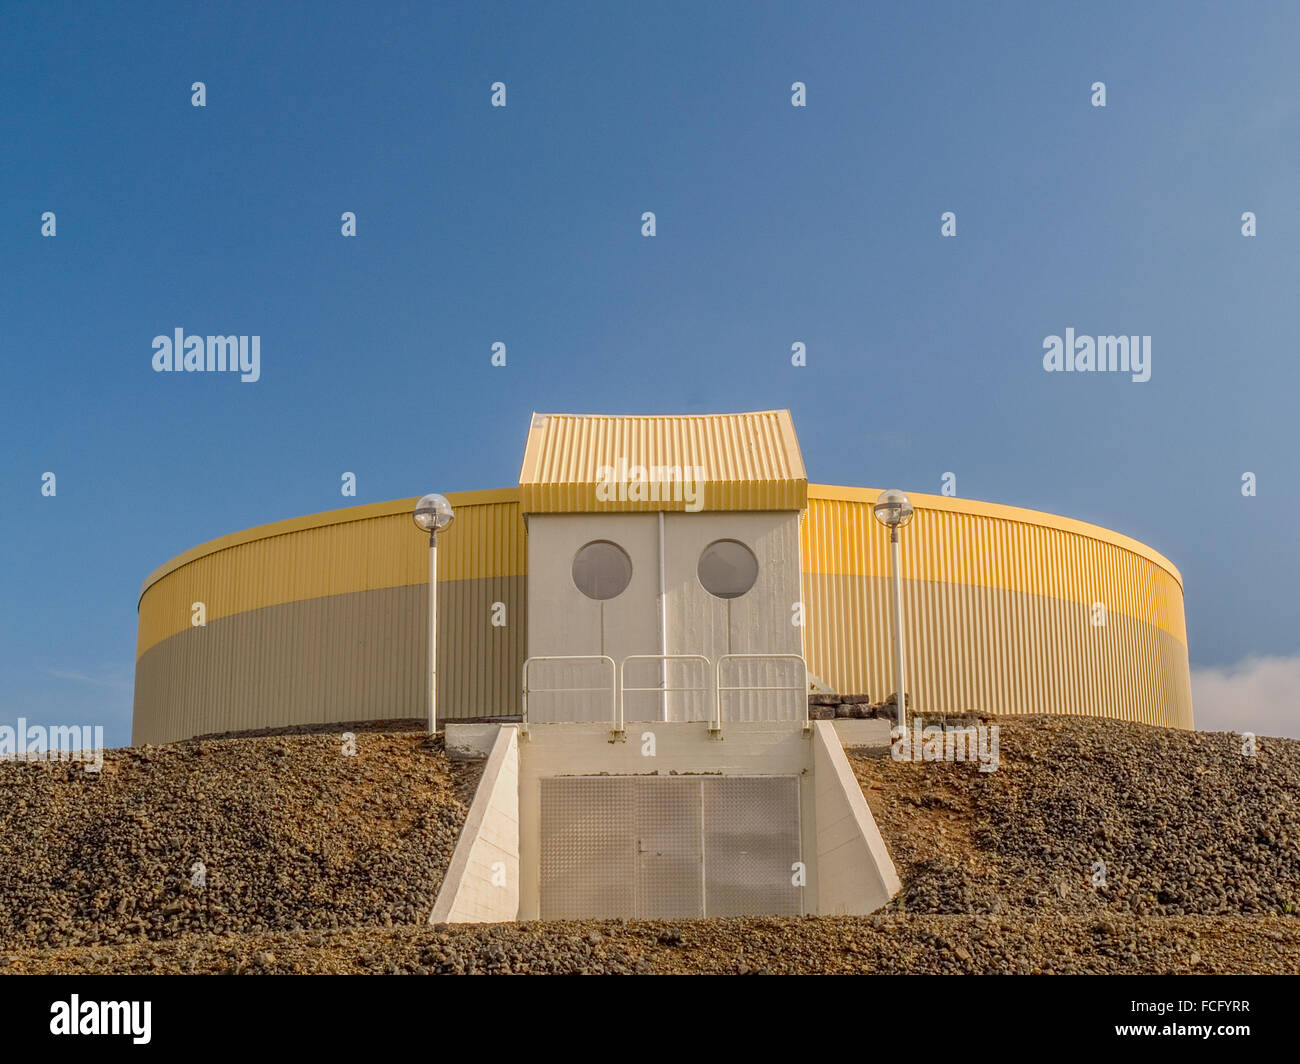 Circular industrial yellow and gray building on top of gravel platform against a blue clear sky near Keflavik Iceland. Stock Photo